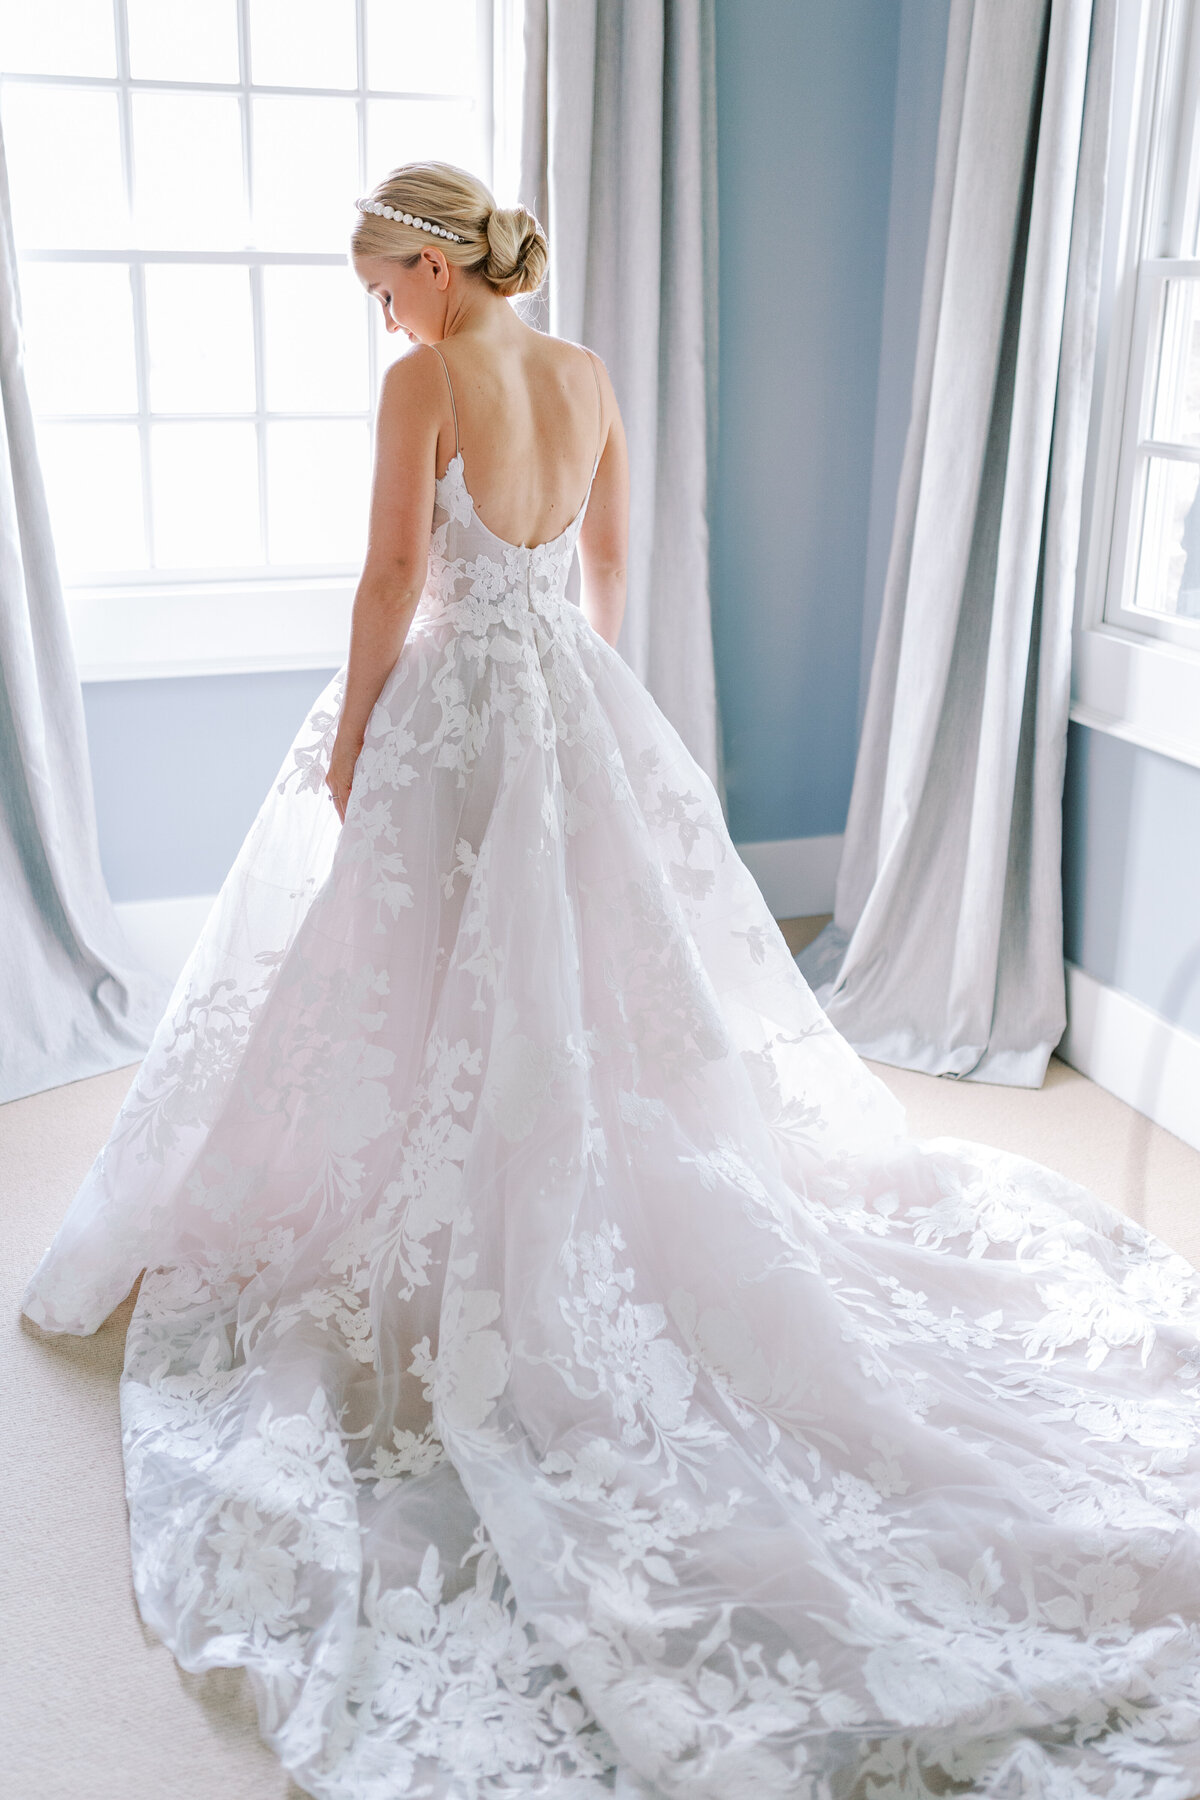 Monique Lhuillier Luxury Wedding gown with lace